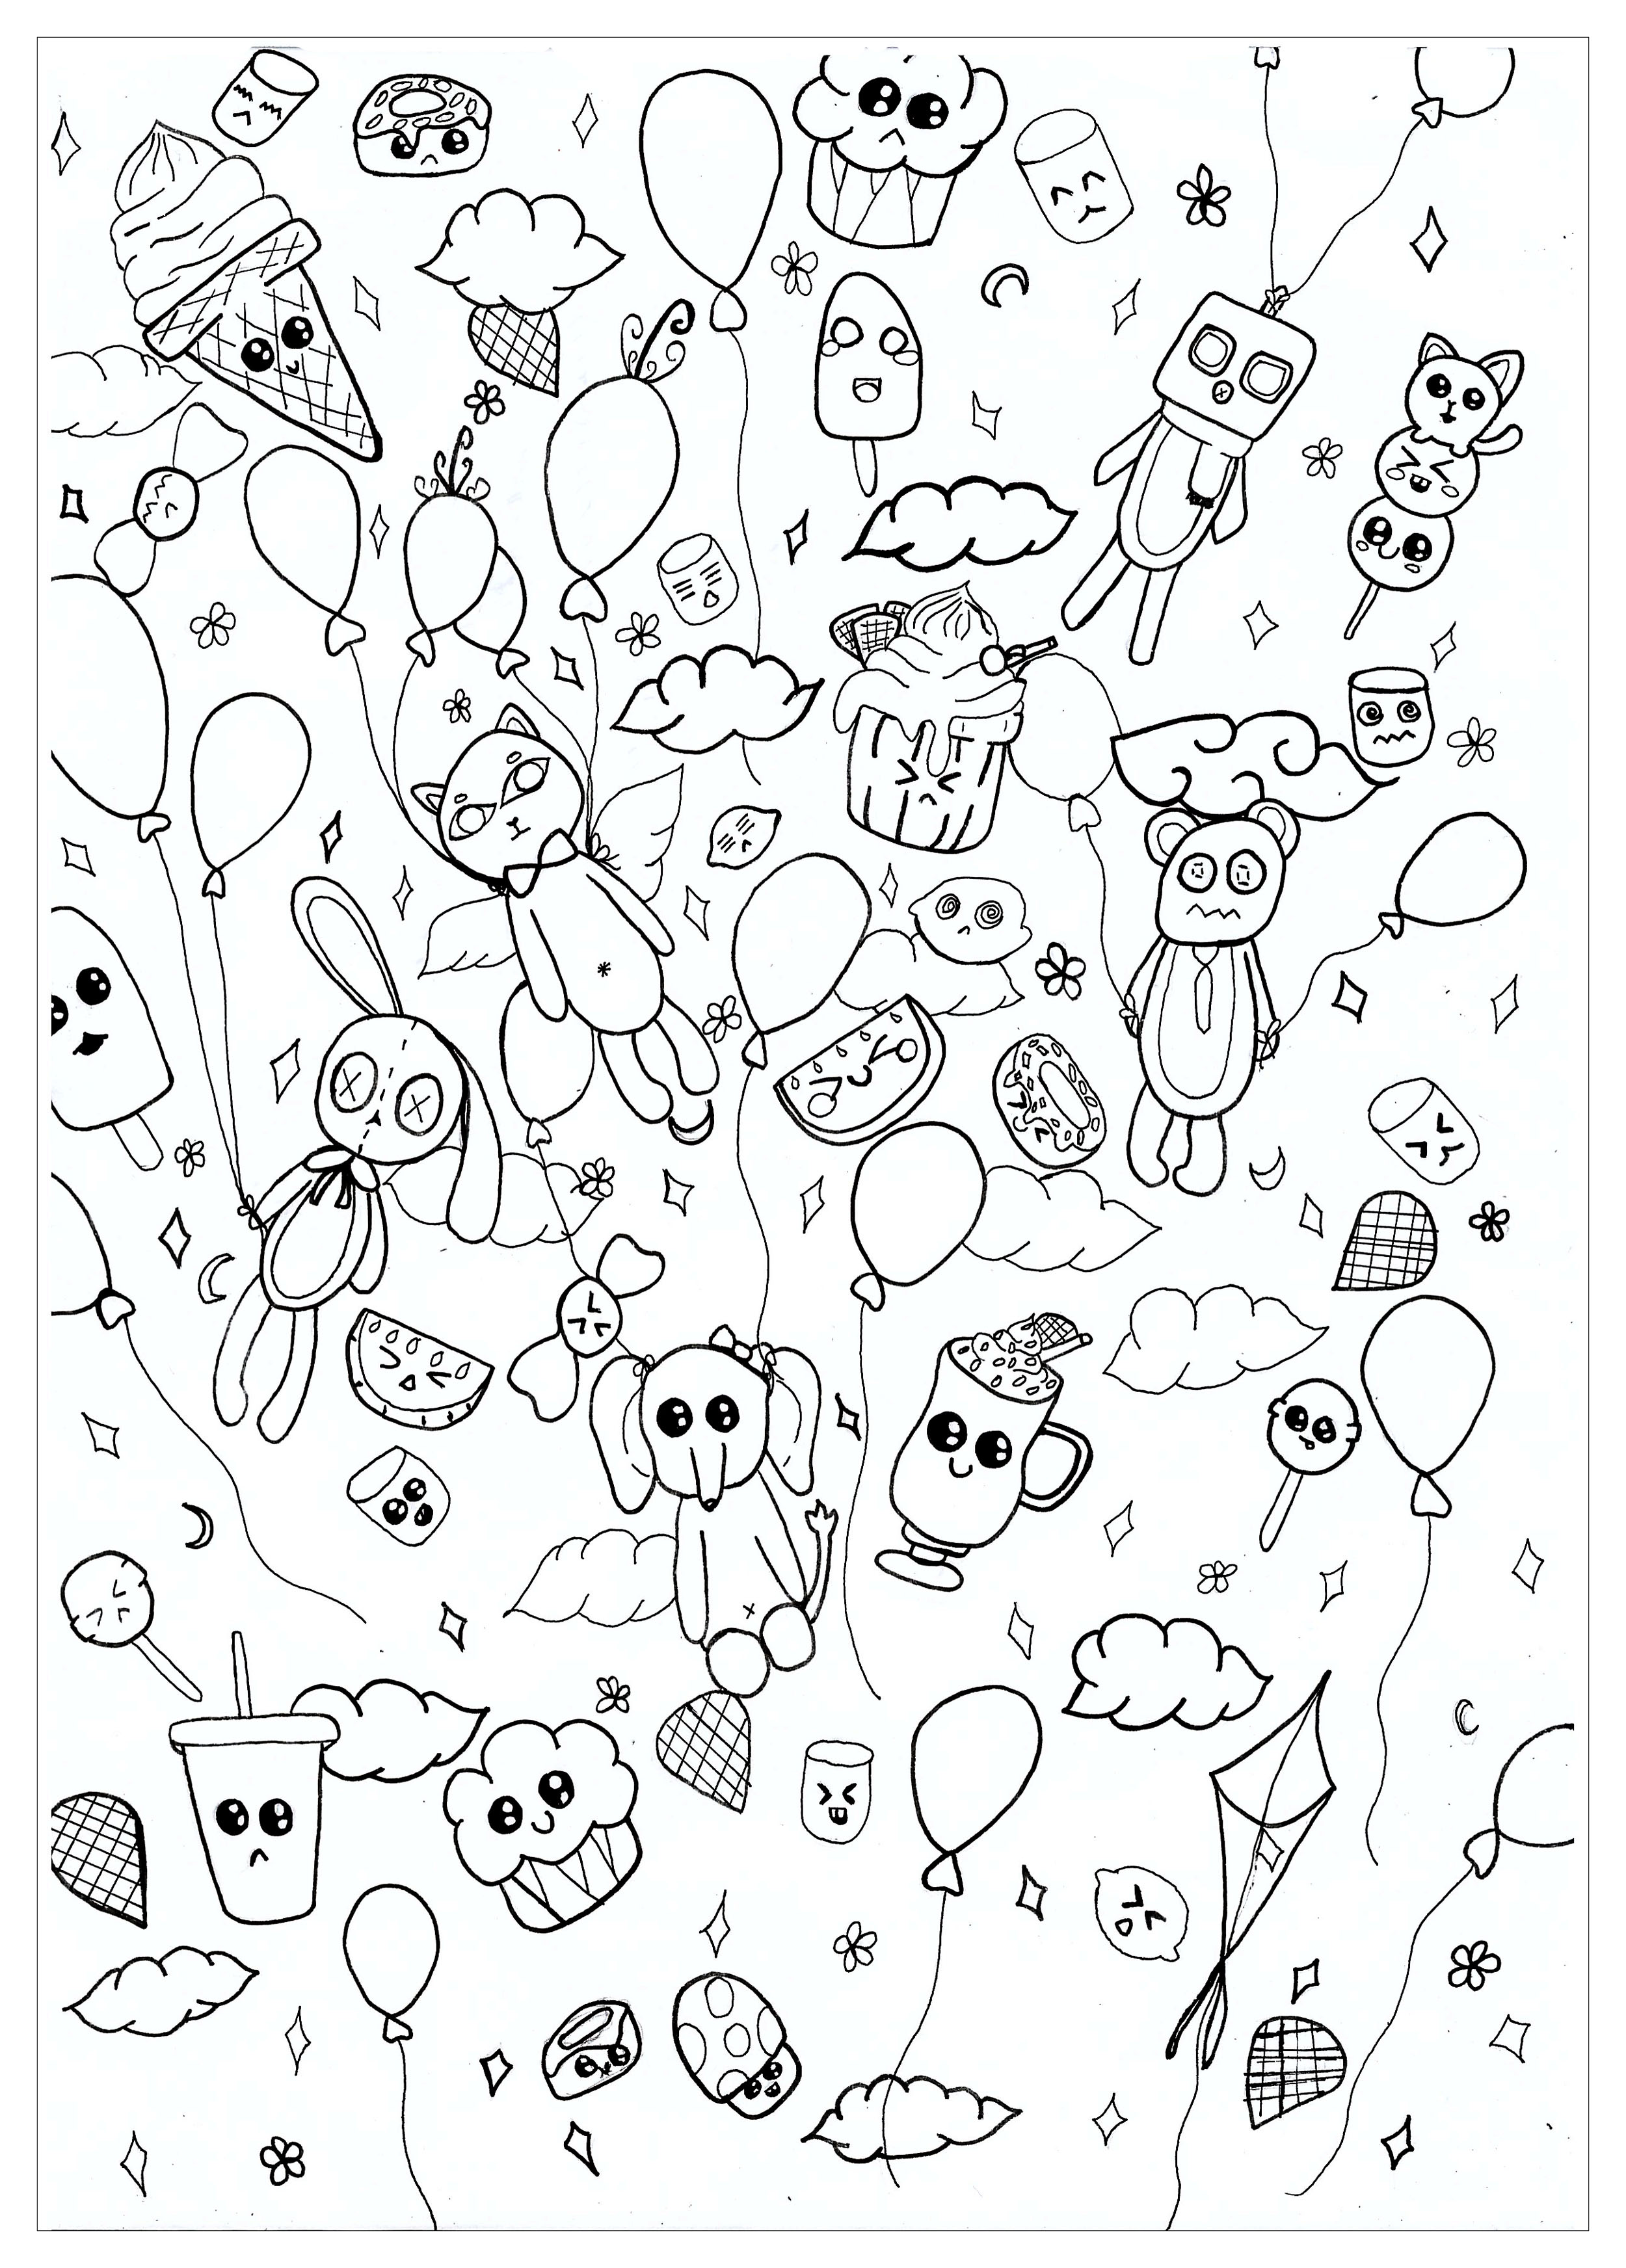 Doodle coloring page of a PARTY with Kawaii characters, Artist : Chloe